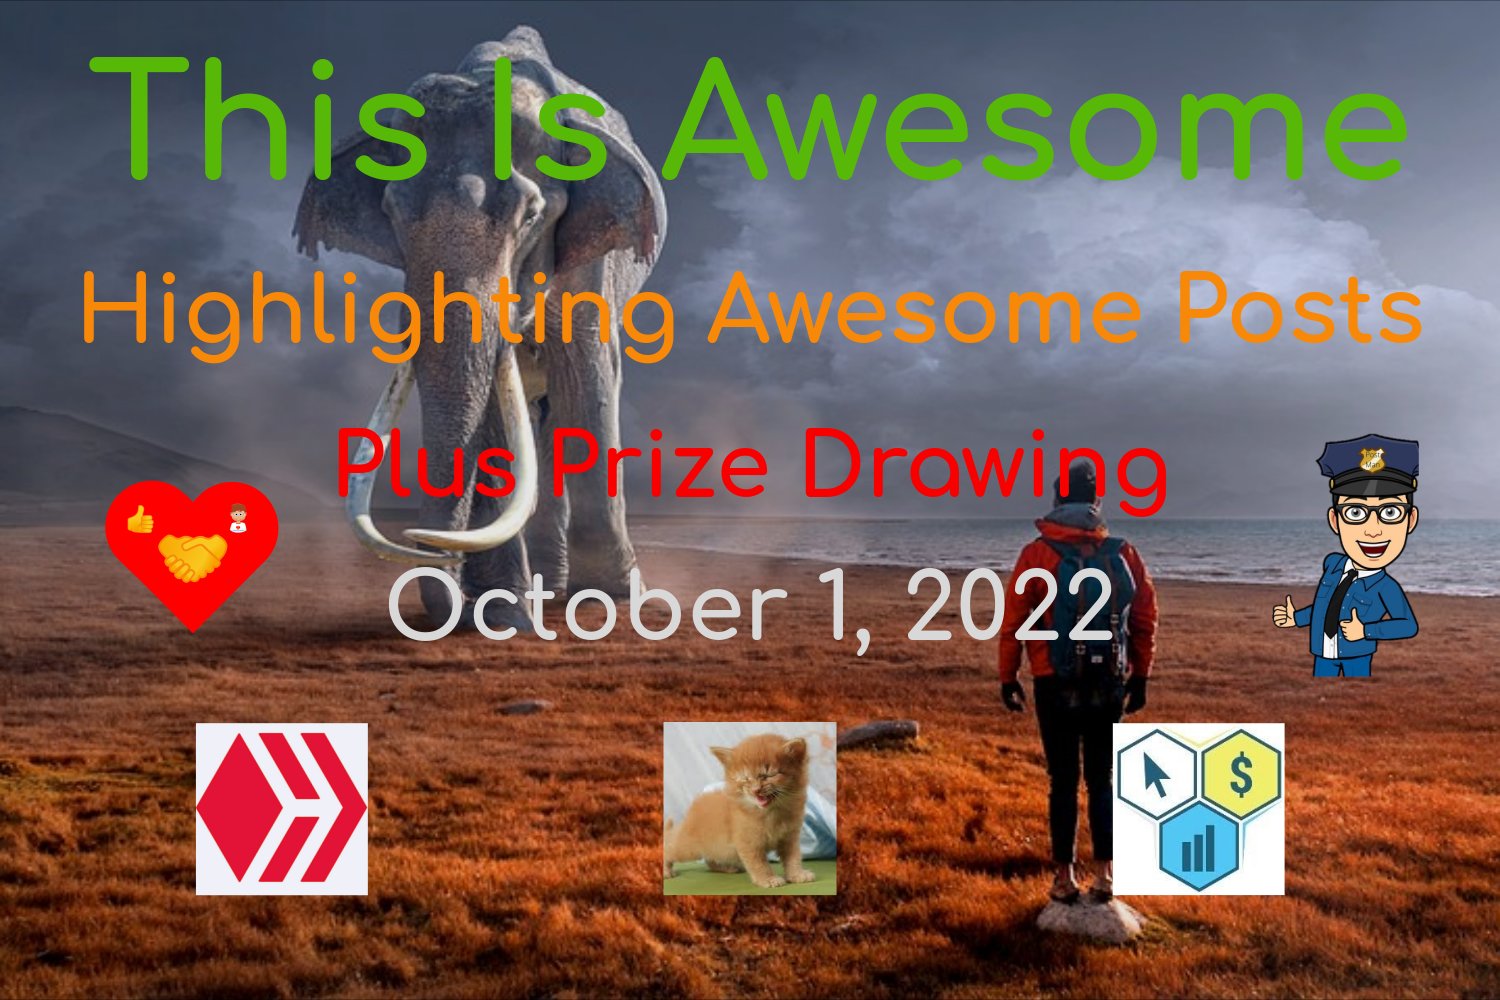 @thisisawesome/this-is-awesome-highlighting-awesome-posts-plus-prize-drawing-october-1-2022